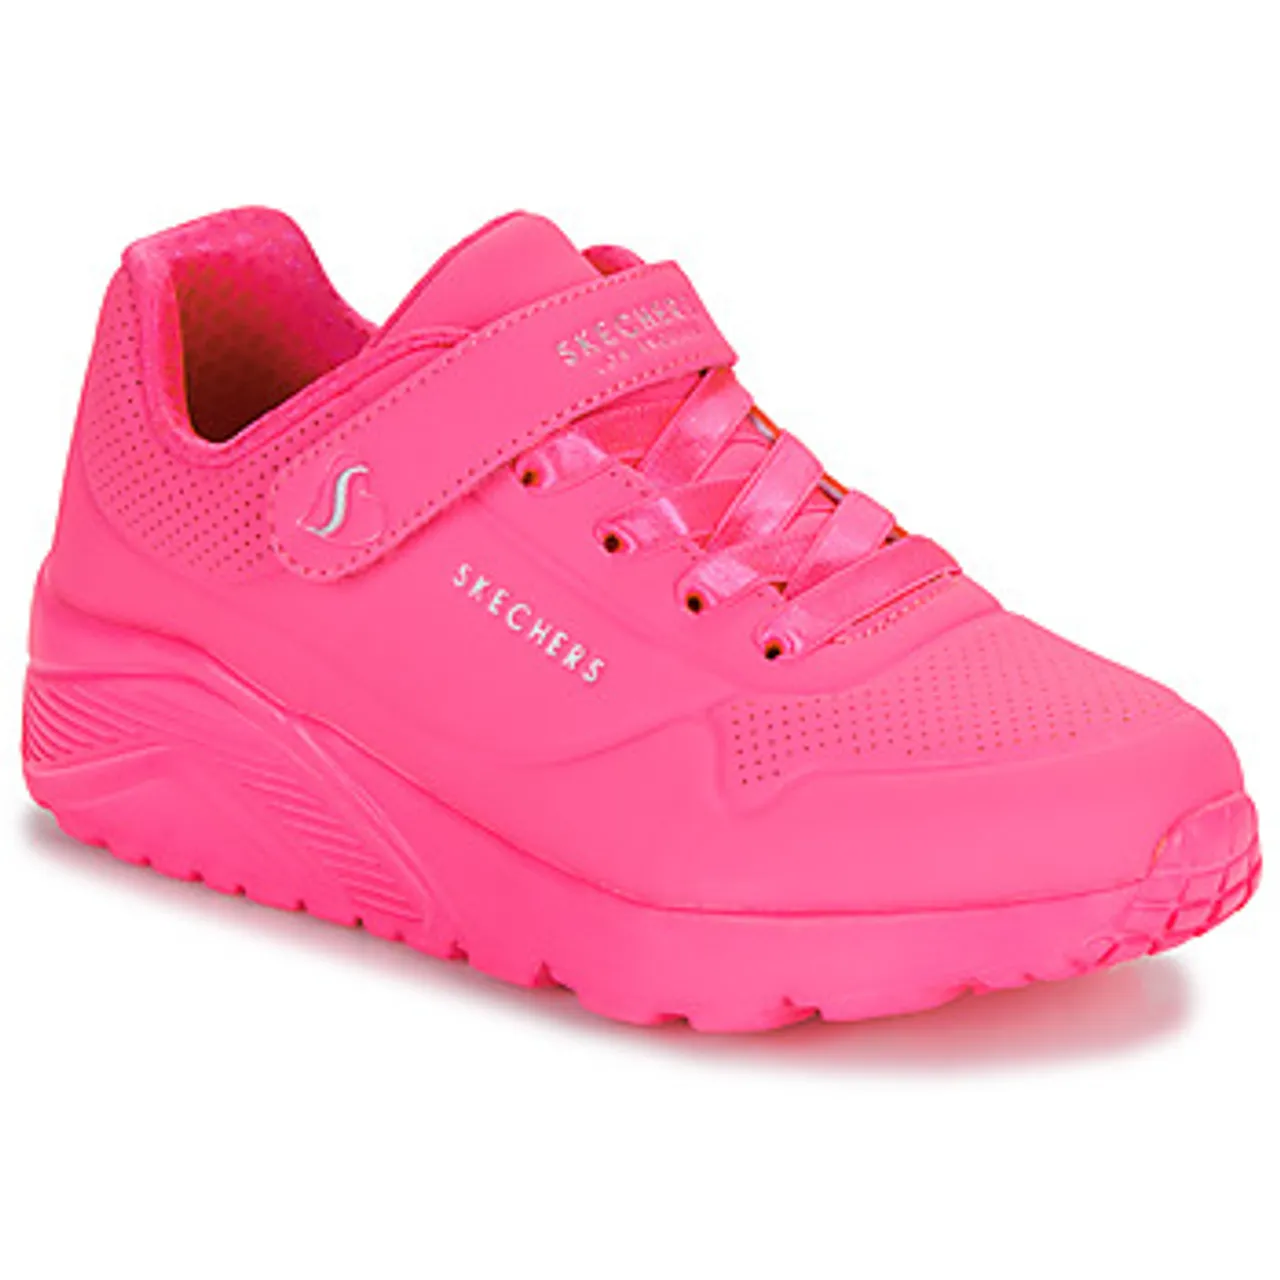 Skechers  UNO LITE - CLASSIC  girls's Children's Shoes (Trainers) in Pink